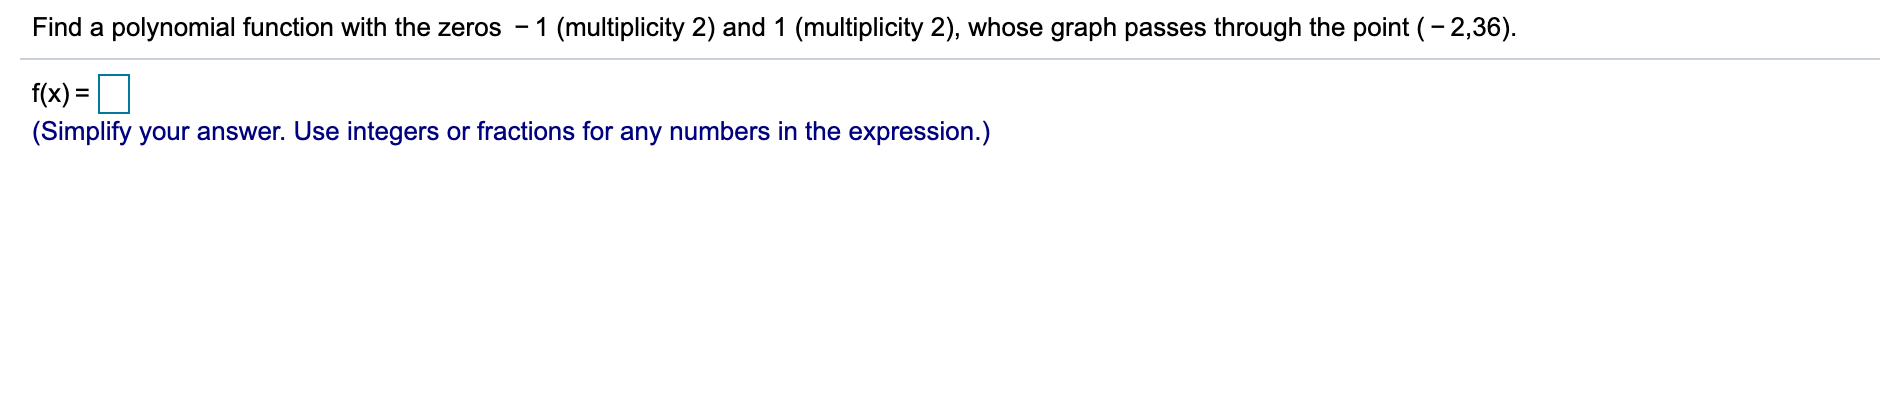 Find a polynomial function with the zeros - 1 (multiplicity 2) and 1 (multiplicity 2), whose graph passes through the point (- 2,36).
f(x) =
(Simplify your answer. Use integers or fractions for any numbers in the expression.)
